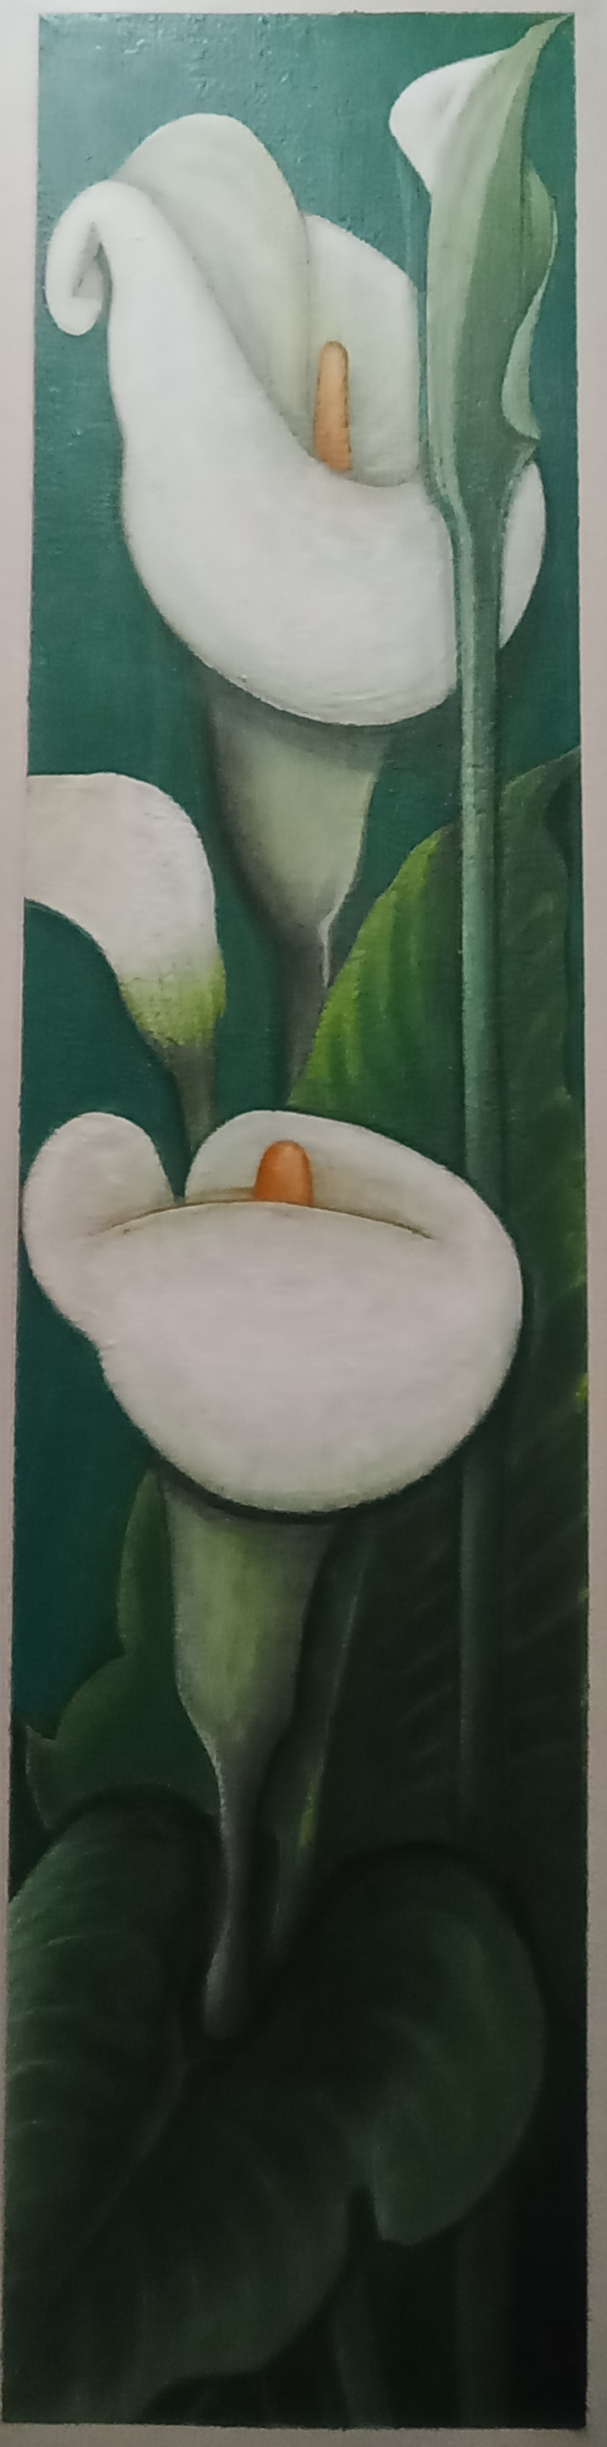 Painting by Khaled Hamdy .H - Calla plant